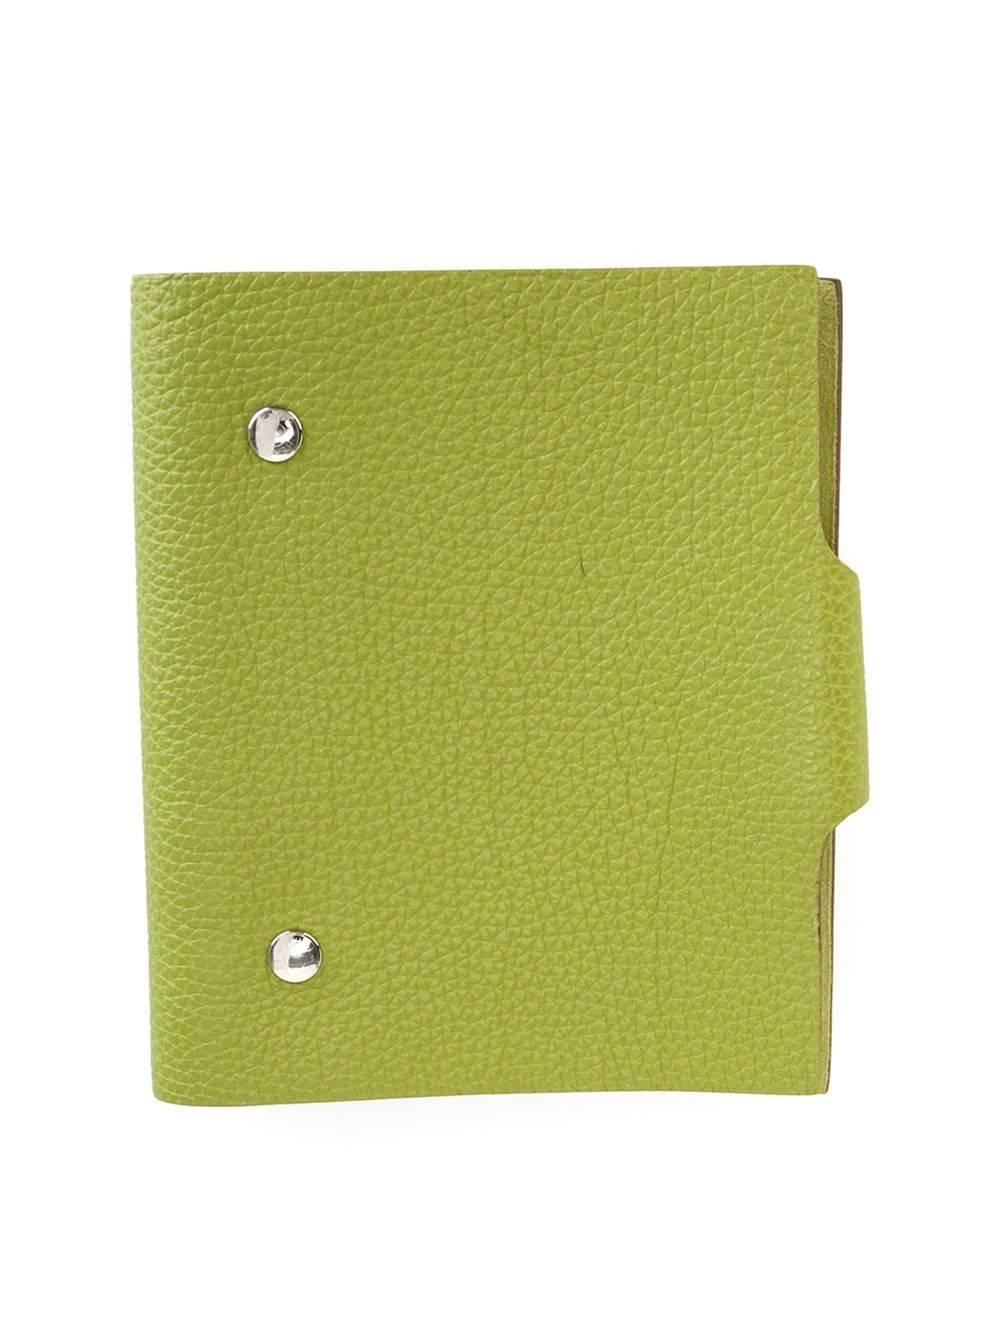 Lime green leather cover notebook featuring a snap button closure.

Colour: Lime Green

Material: Paper 70% Leather 20% Plastic 10%

Measurements: W: 13cm L:16cm

Condition: 8.5 out of 10
Very good